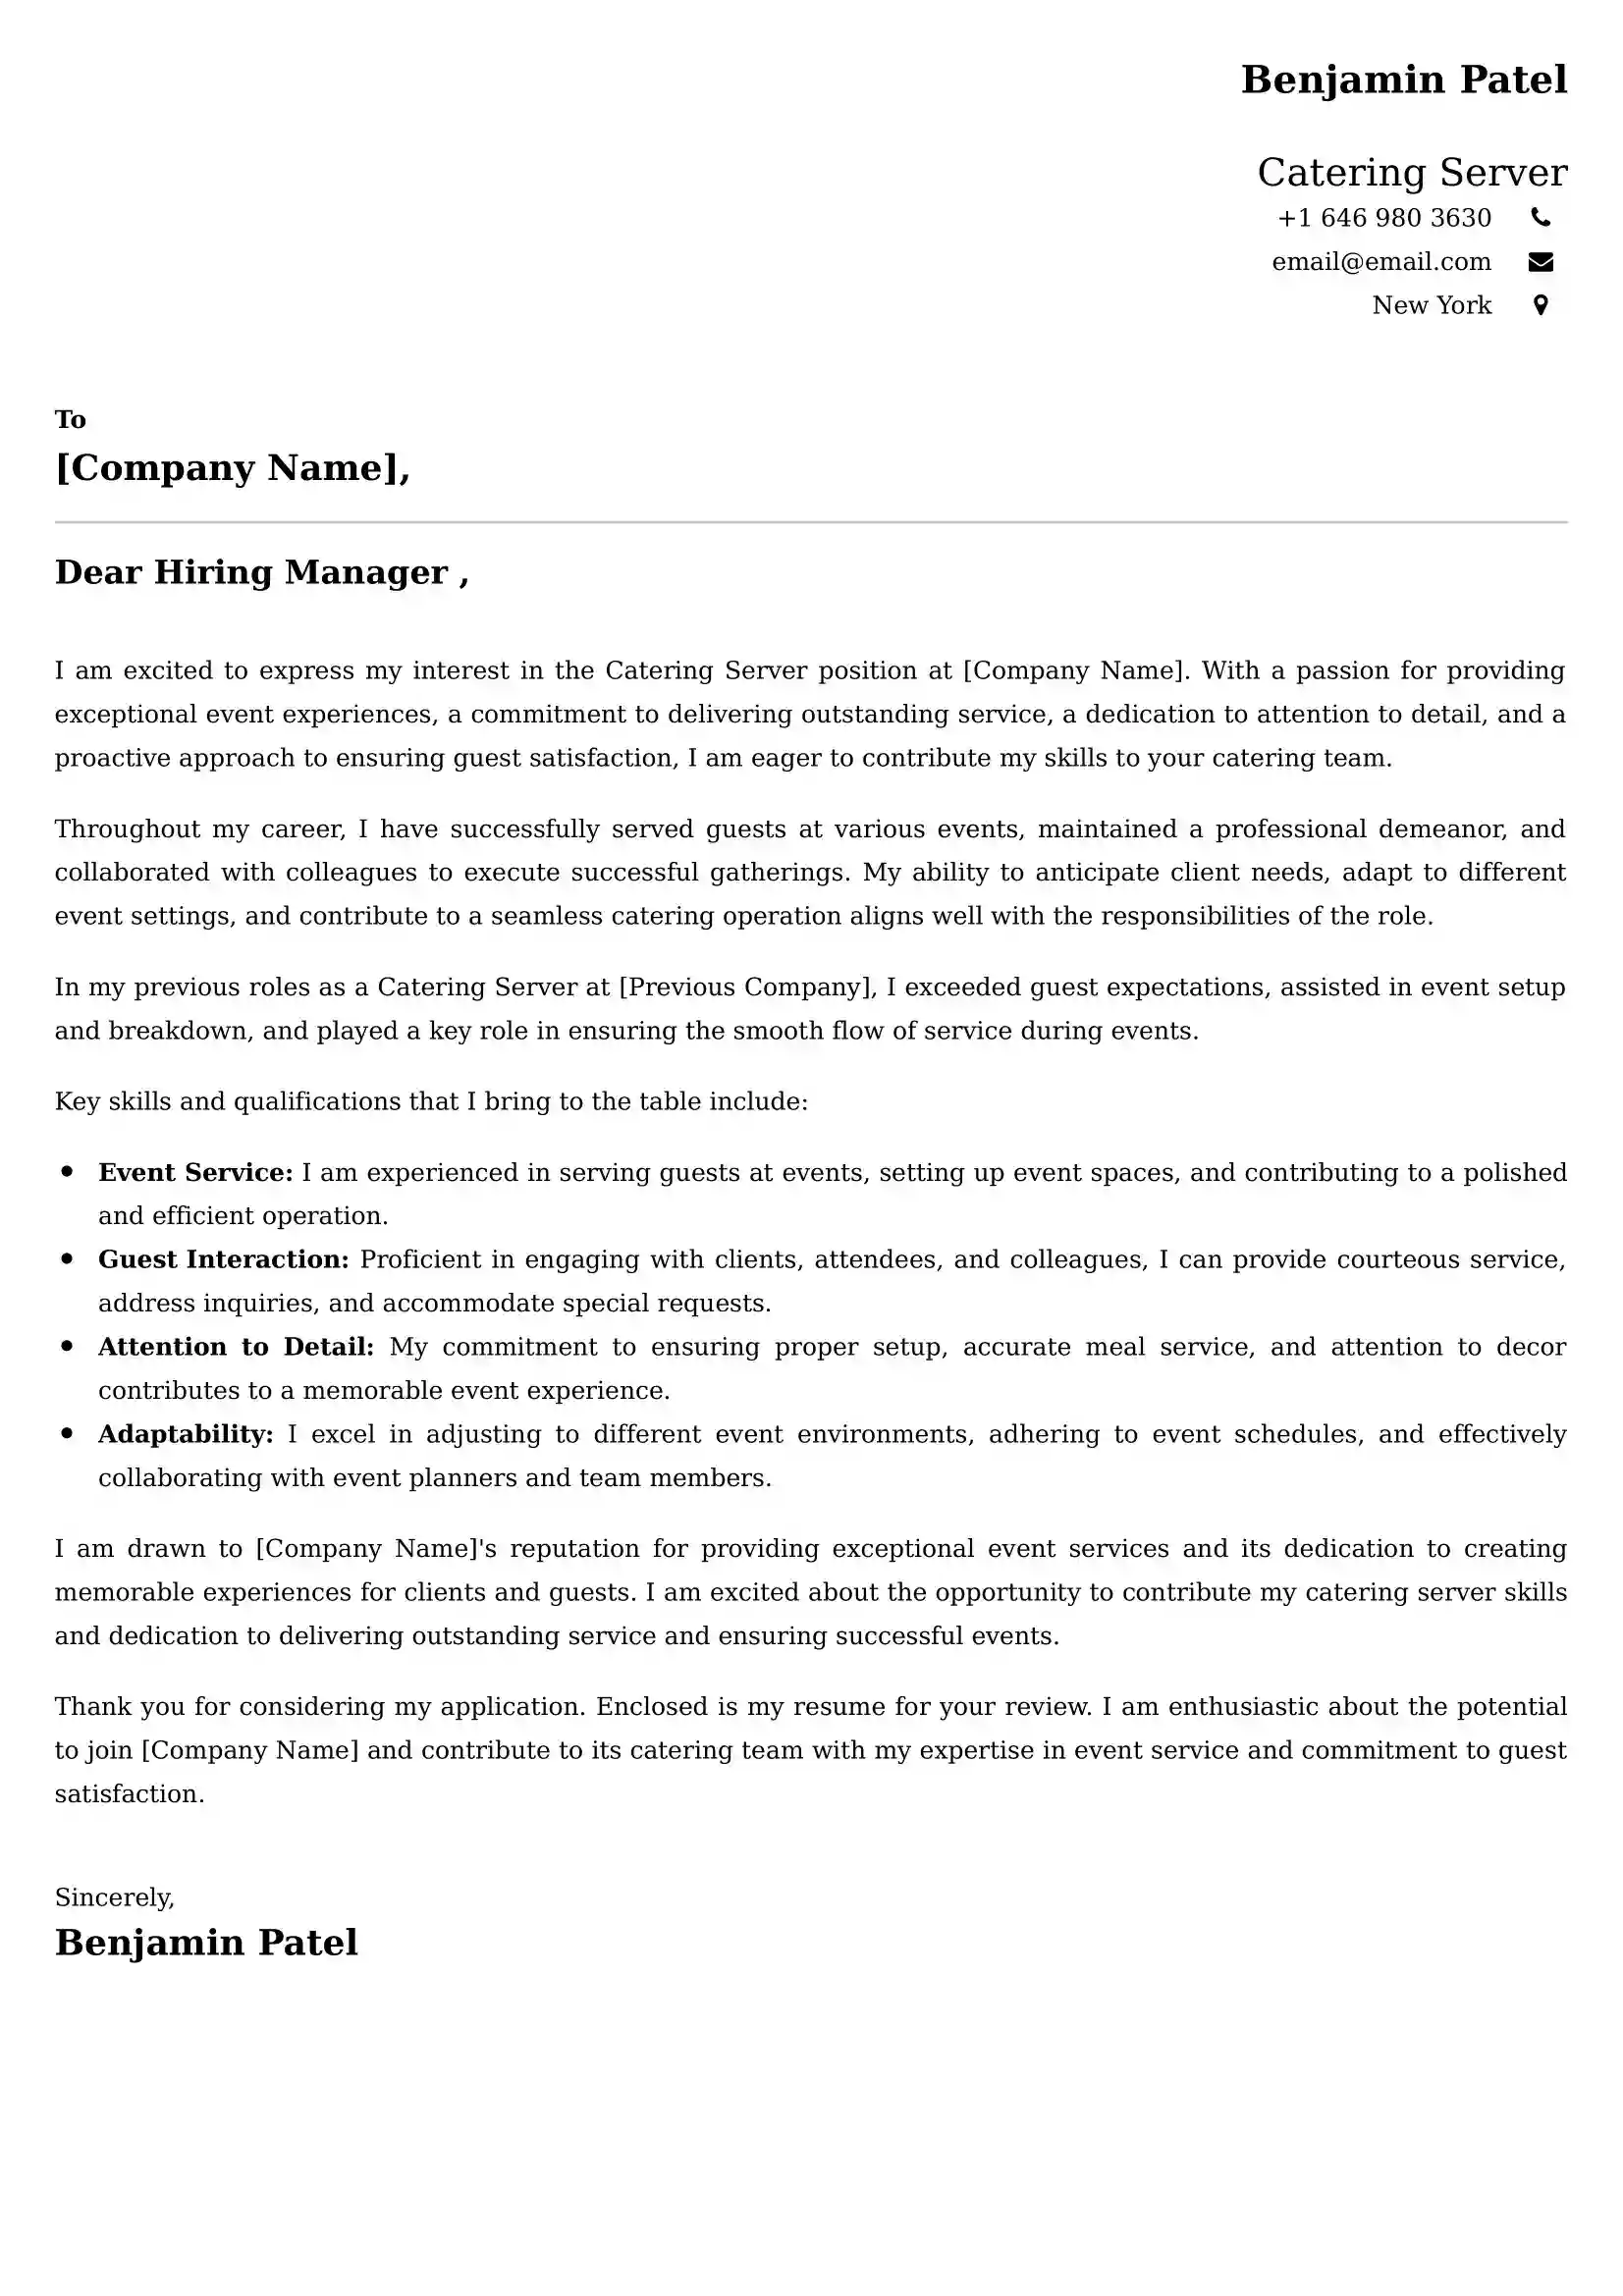 Catering Server Cover Letter Examples - Latest UK Format